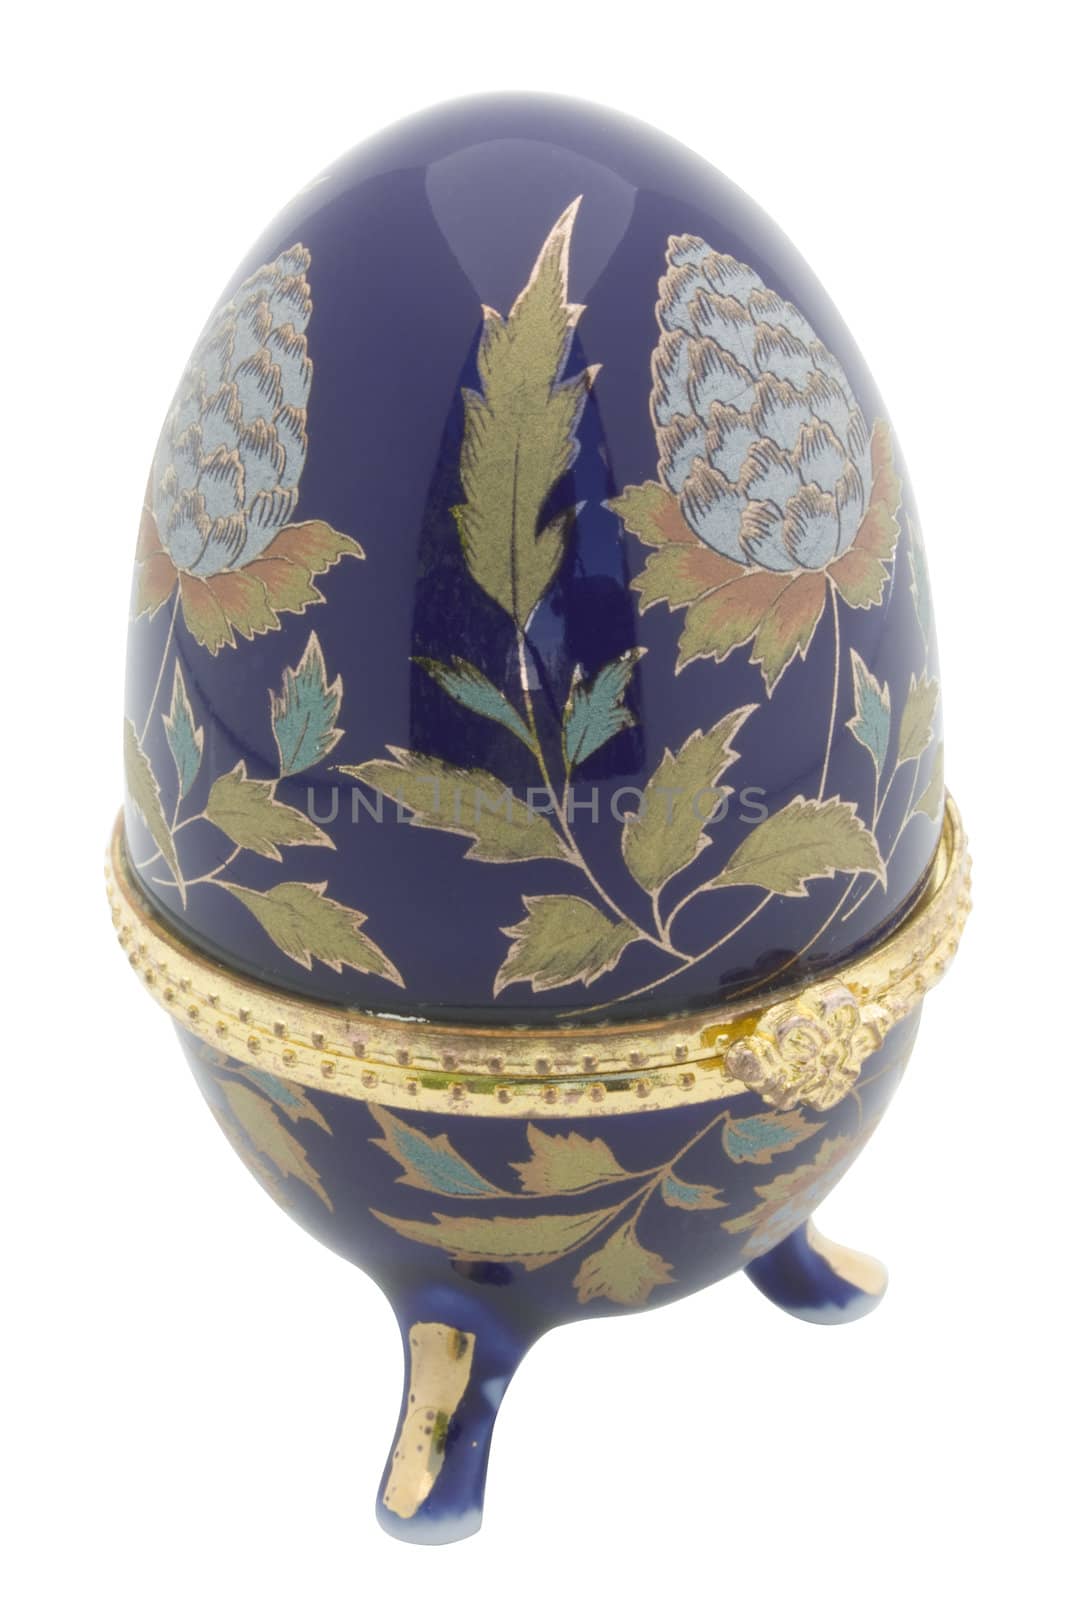 Ceramic casket as eggs faberge dark blue color with gold furnish it is isolated on a white background.